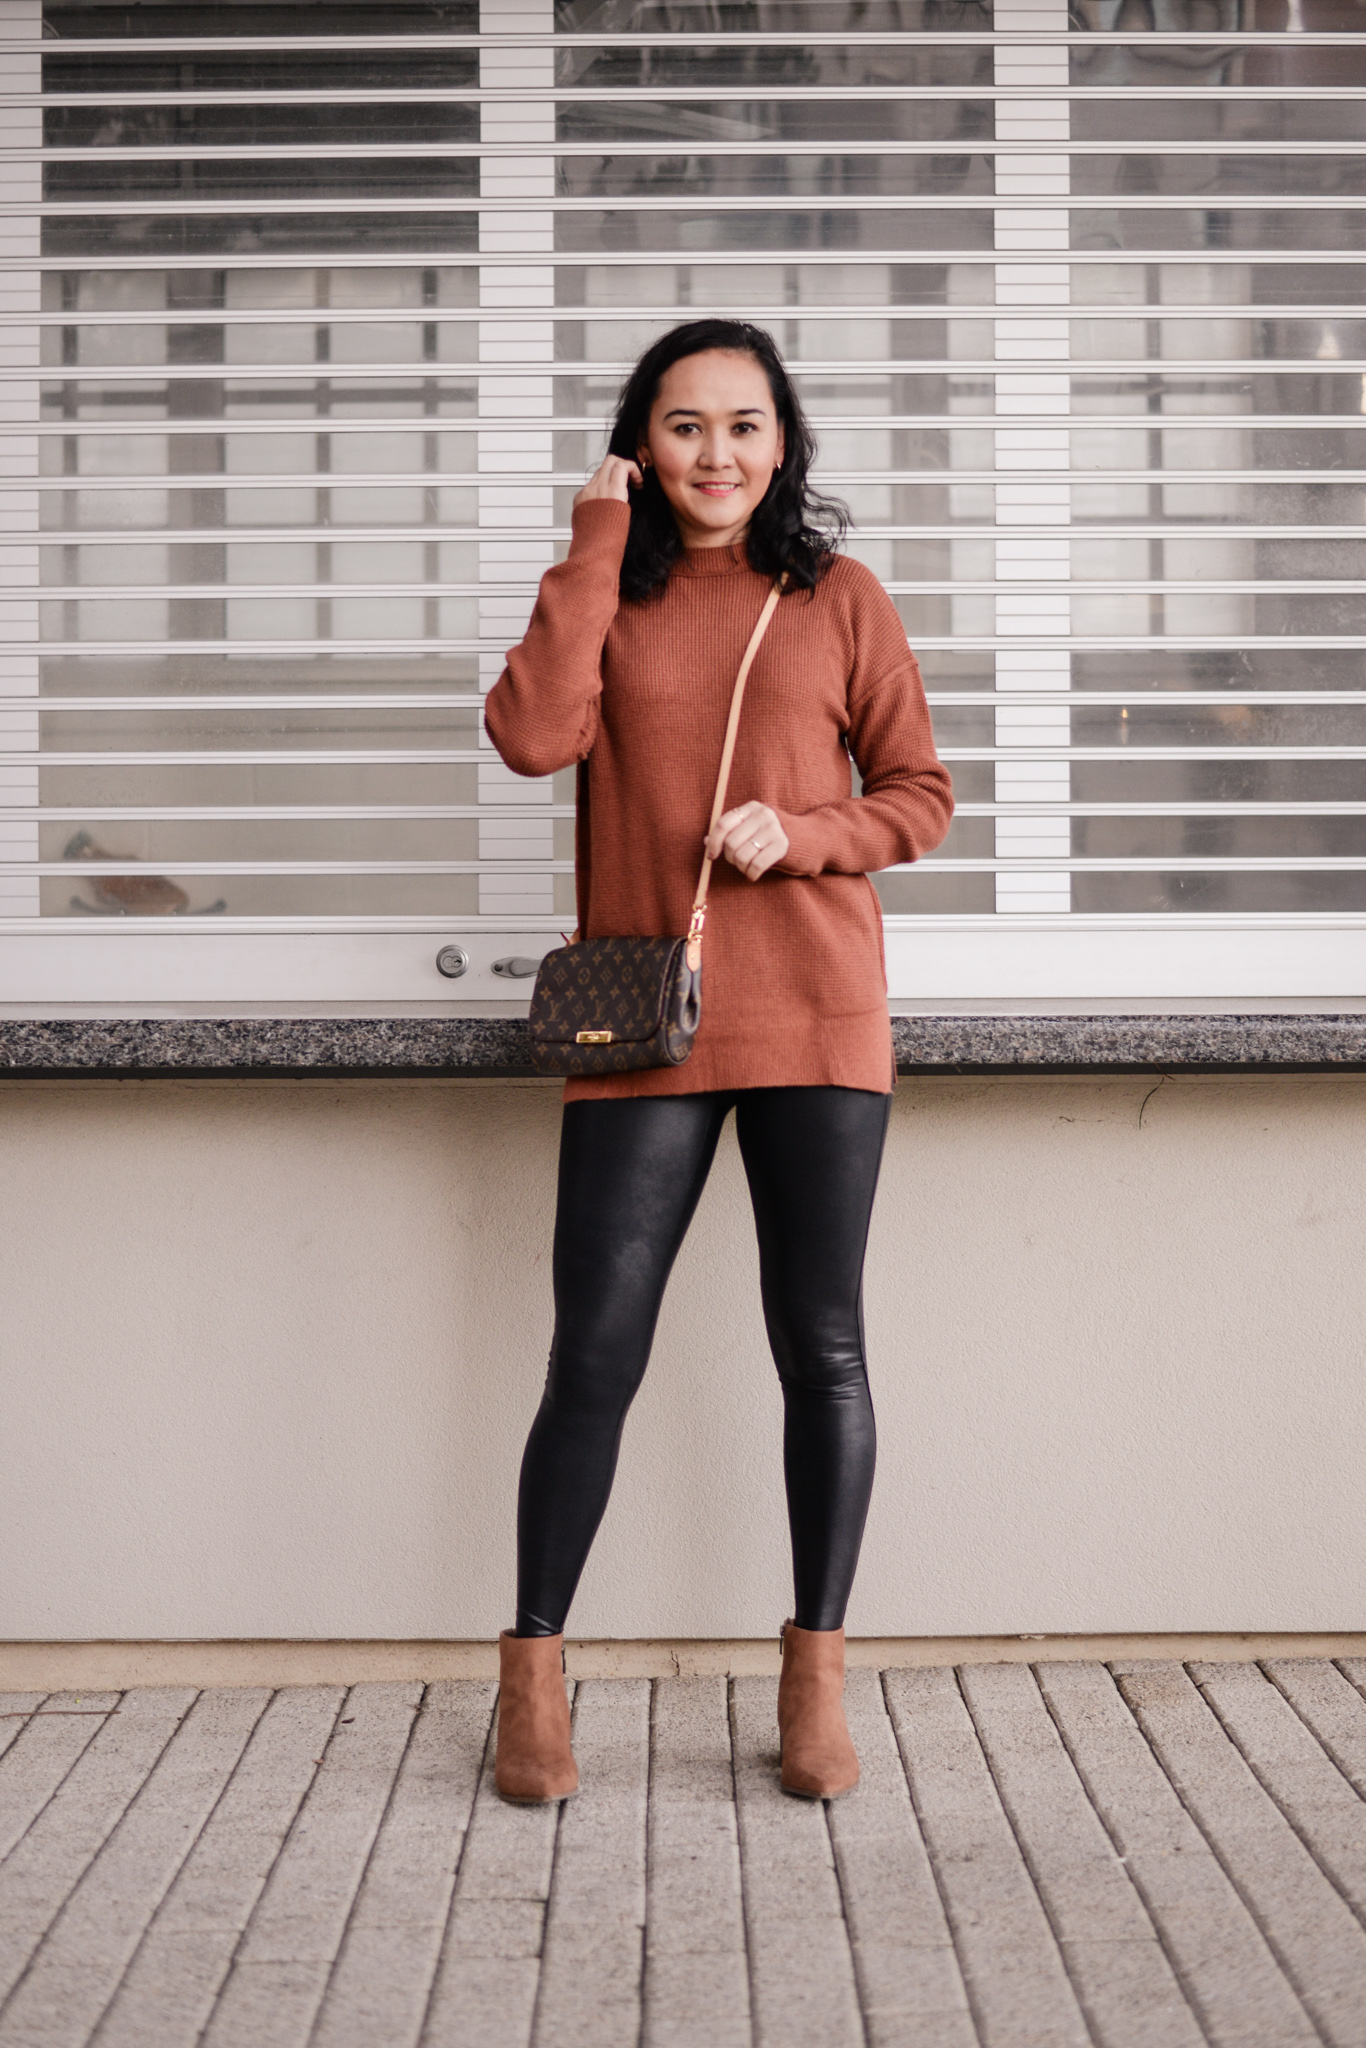 Workwear Outfit Idea with Split Hem Leggings - Lil bits of Chic